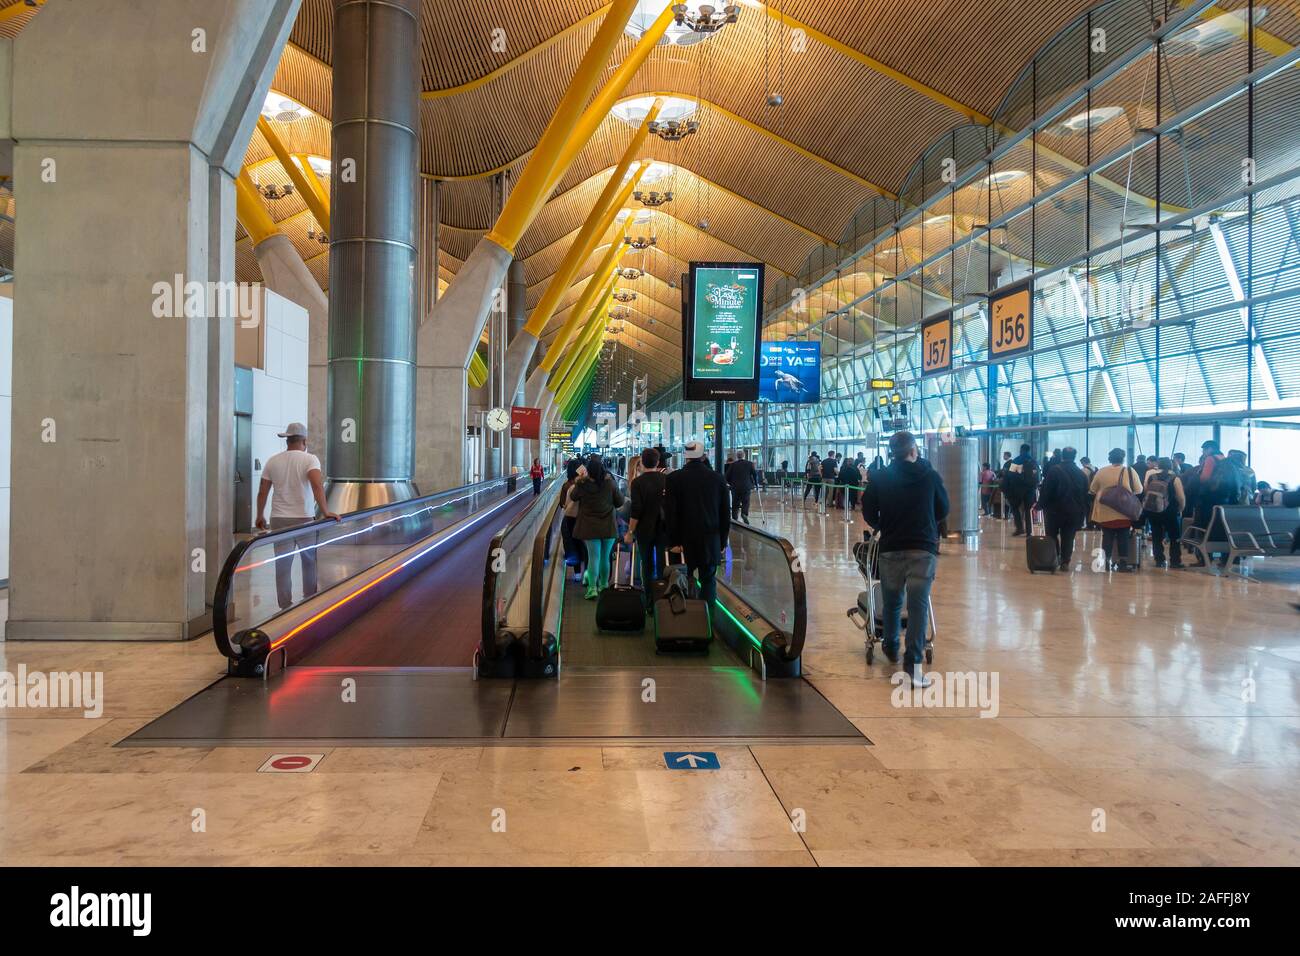 Moving walkways or travelators in Madrid-Barajas Adolfo Suárez Airport, Madrid, Spain help passengers get to their departure gates quickly. Stock Photo